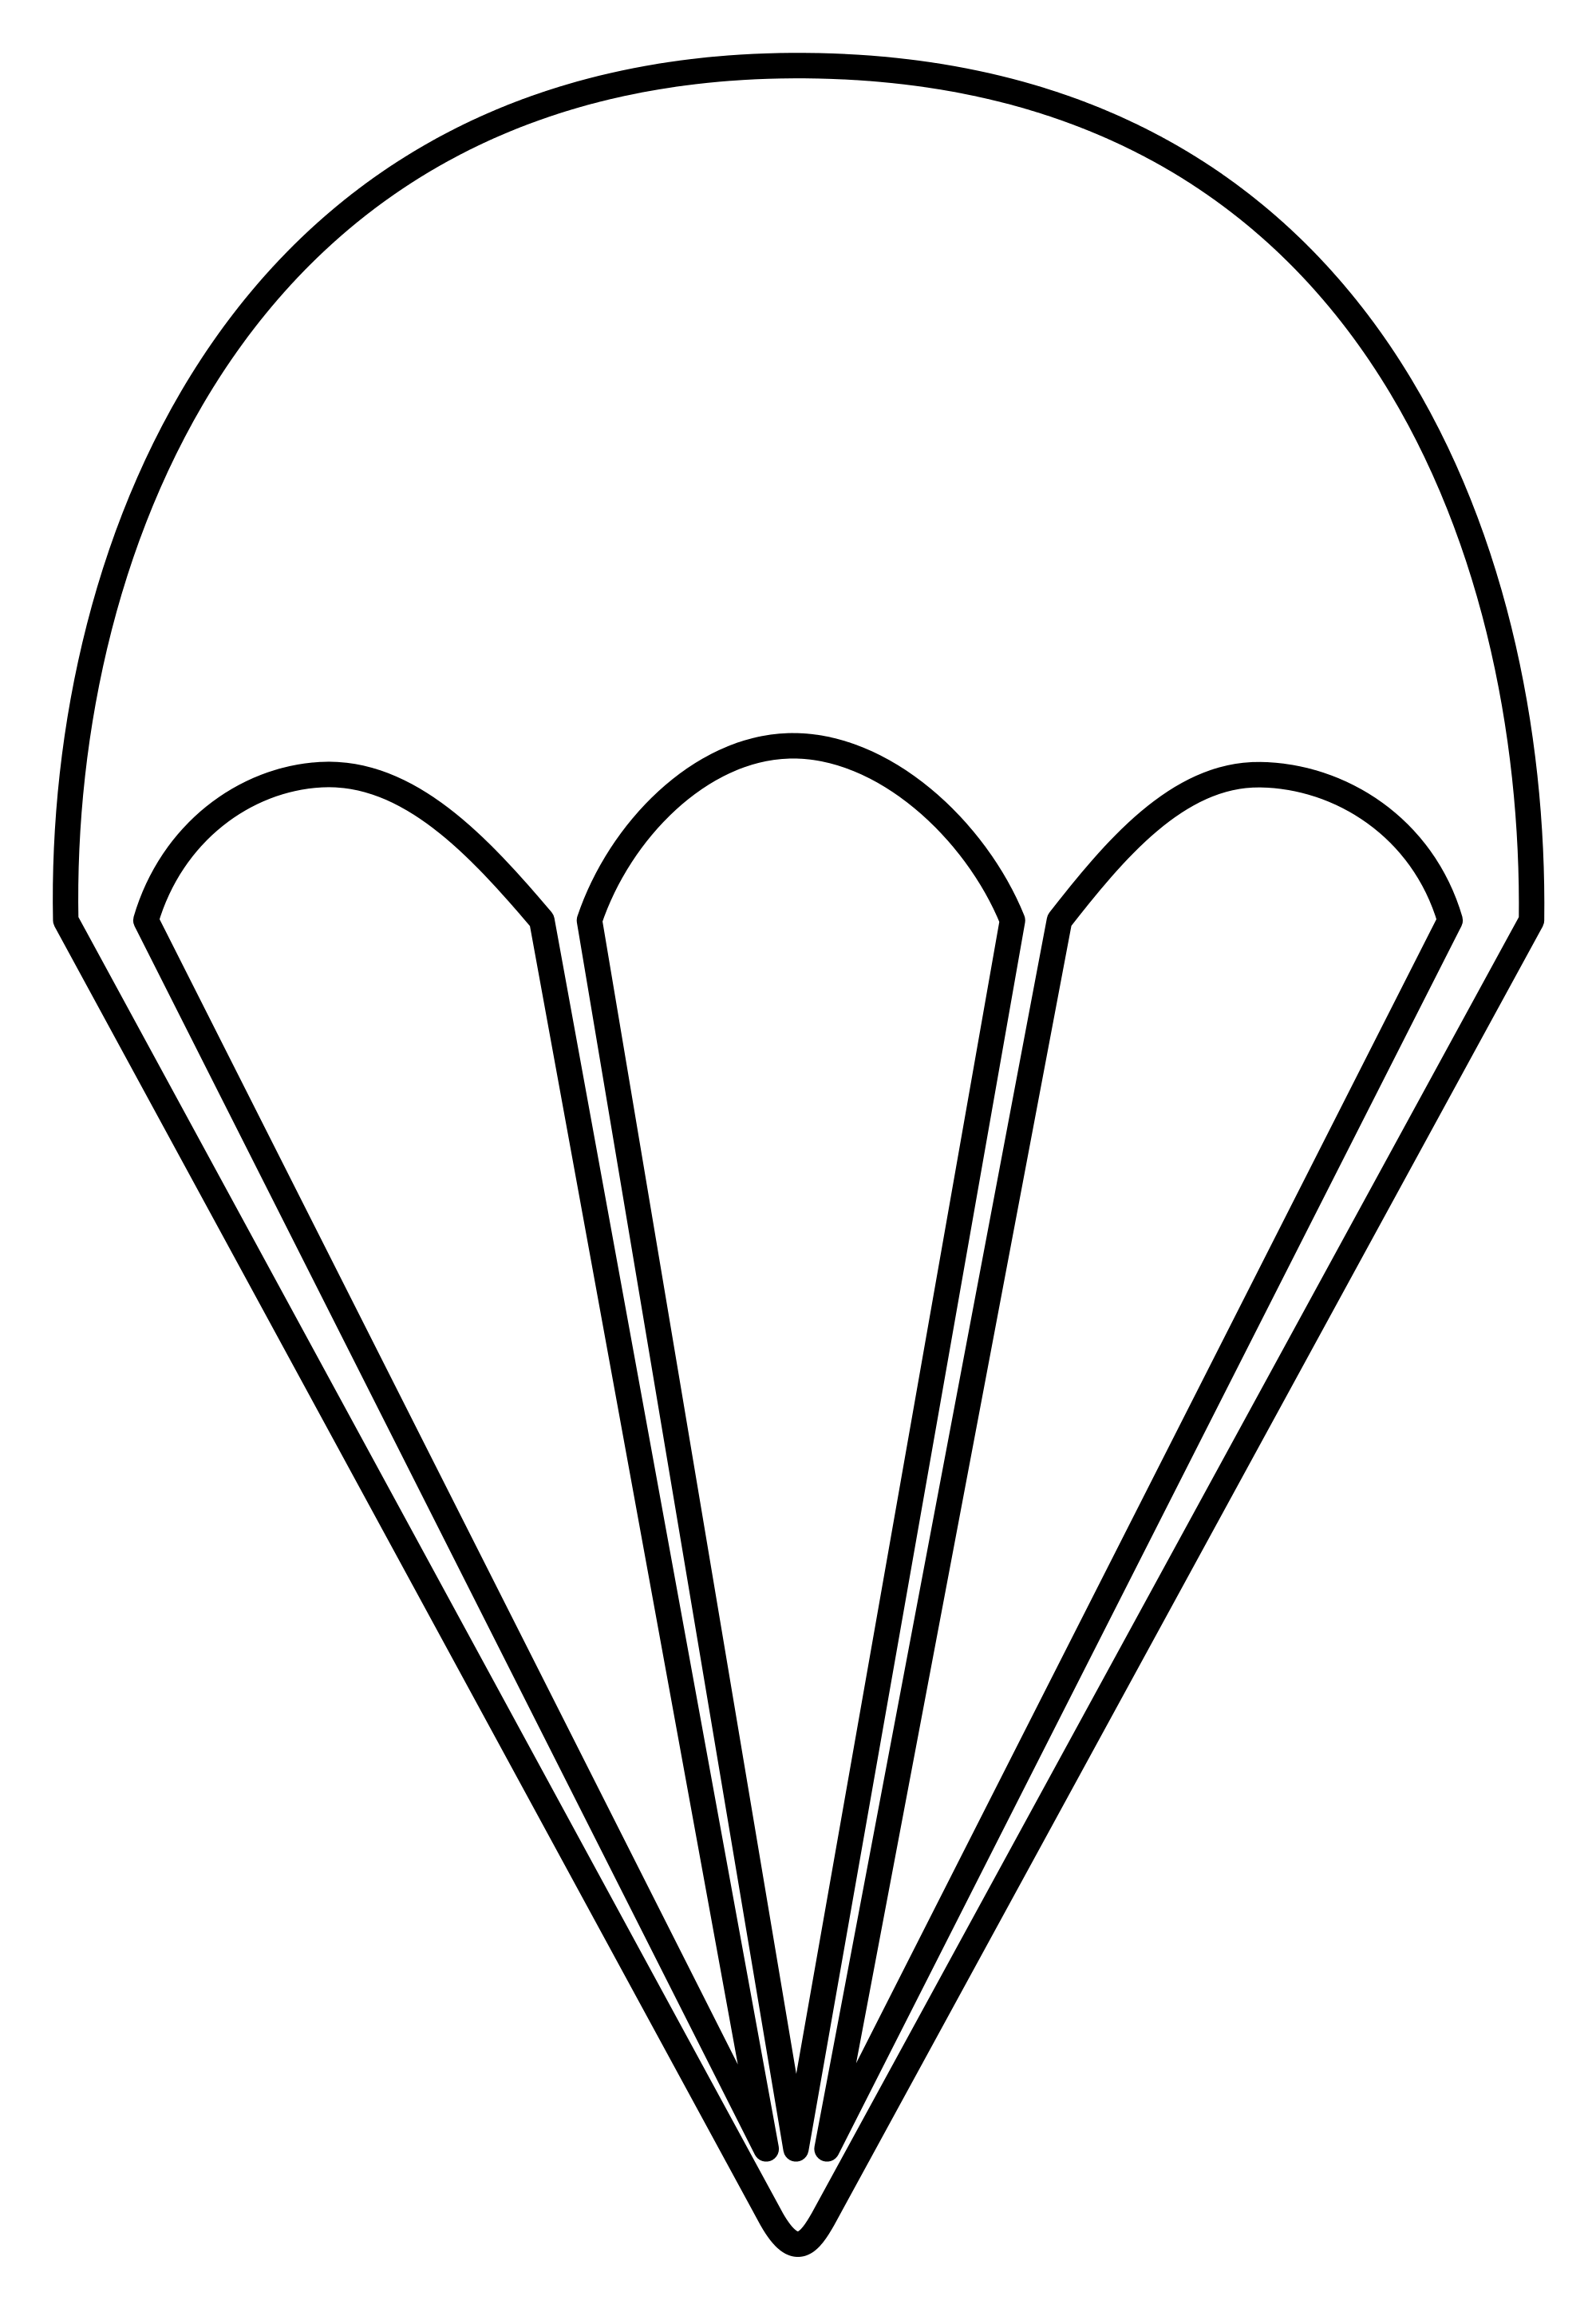 Parachute svg #8, Download drawings